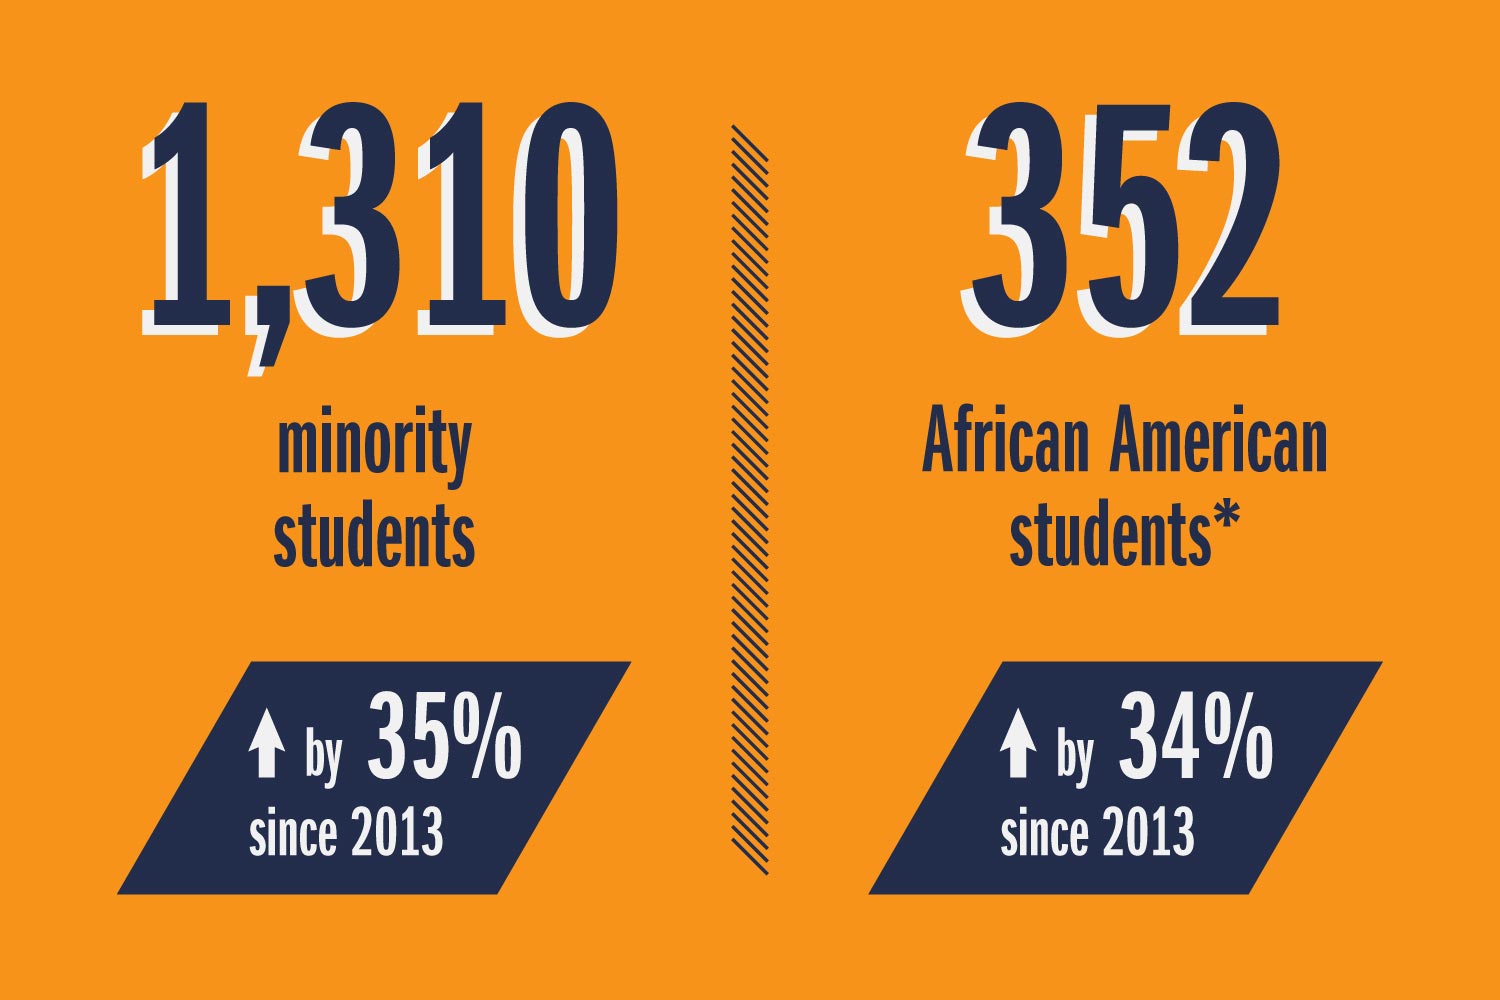 text reads: 1310 minority students up by 35% since 2013 and 352 African American Students* up by 34% since 2013